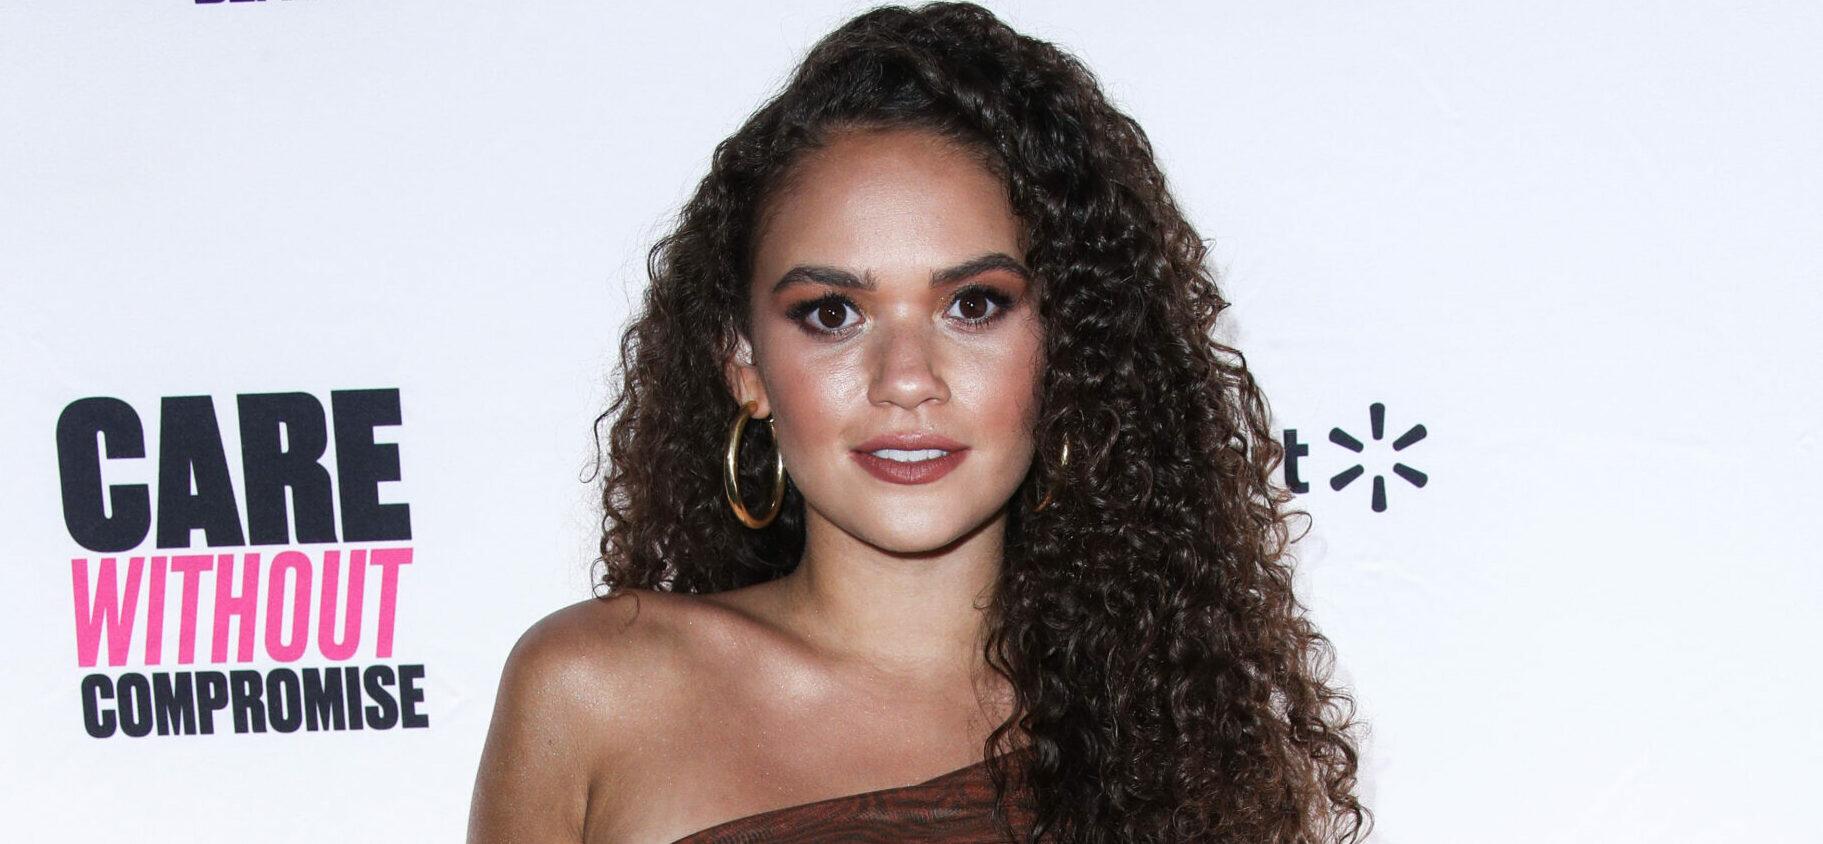 Madison Pettis Reads A Book In See-Through Lace Dress With High Slit